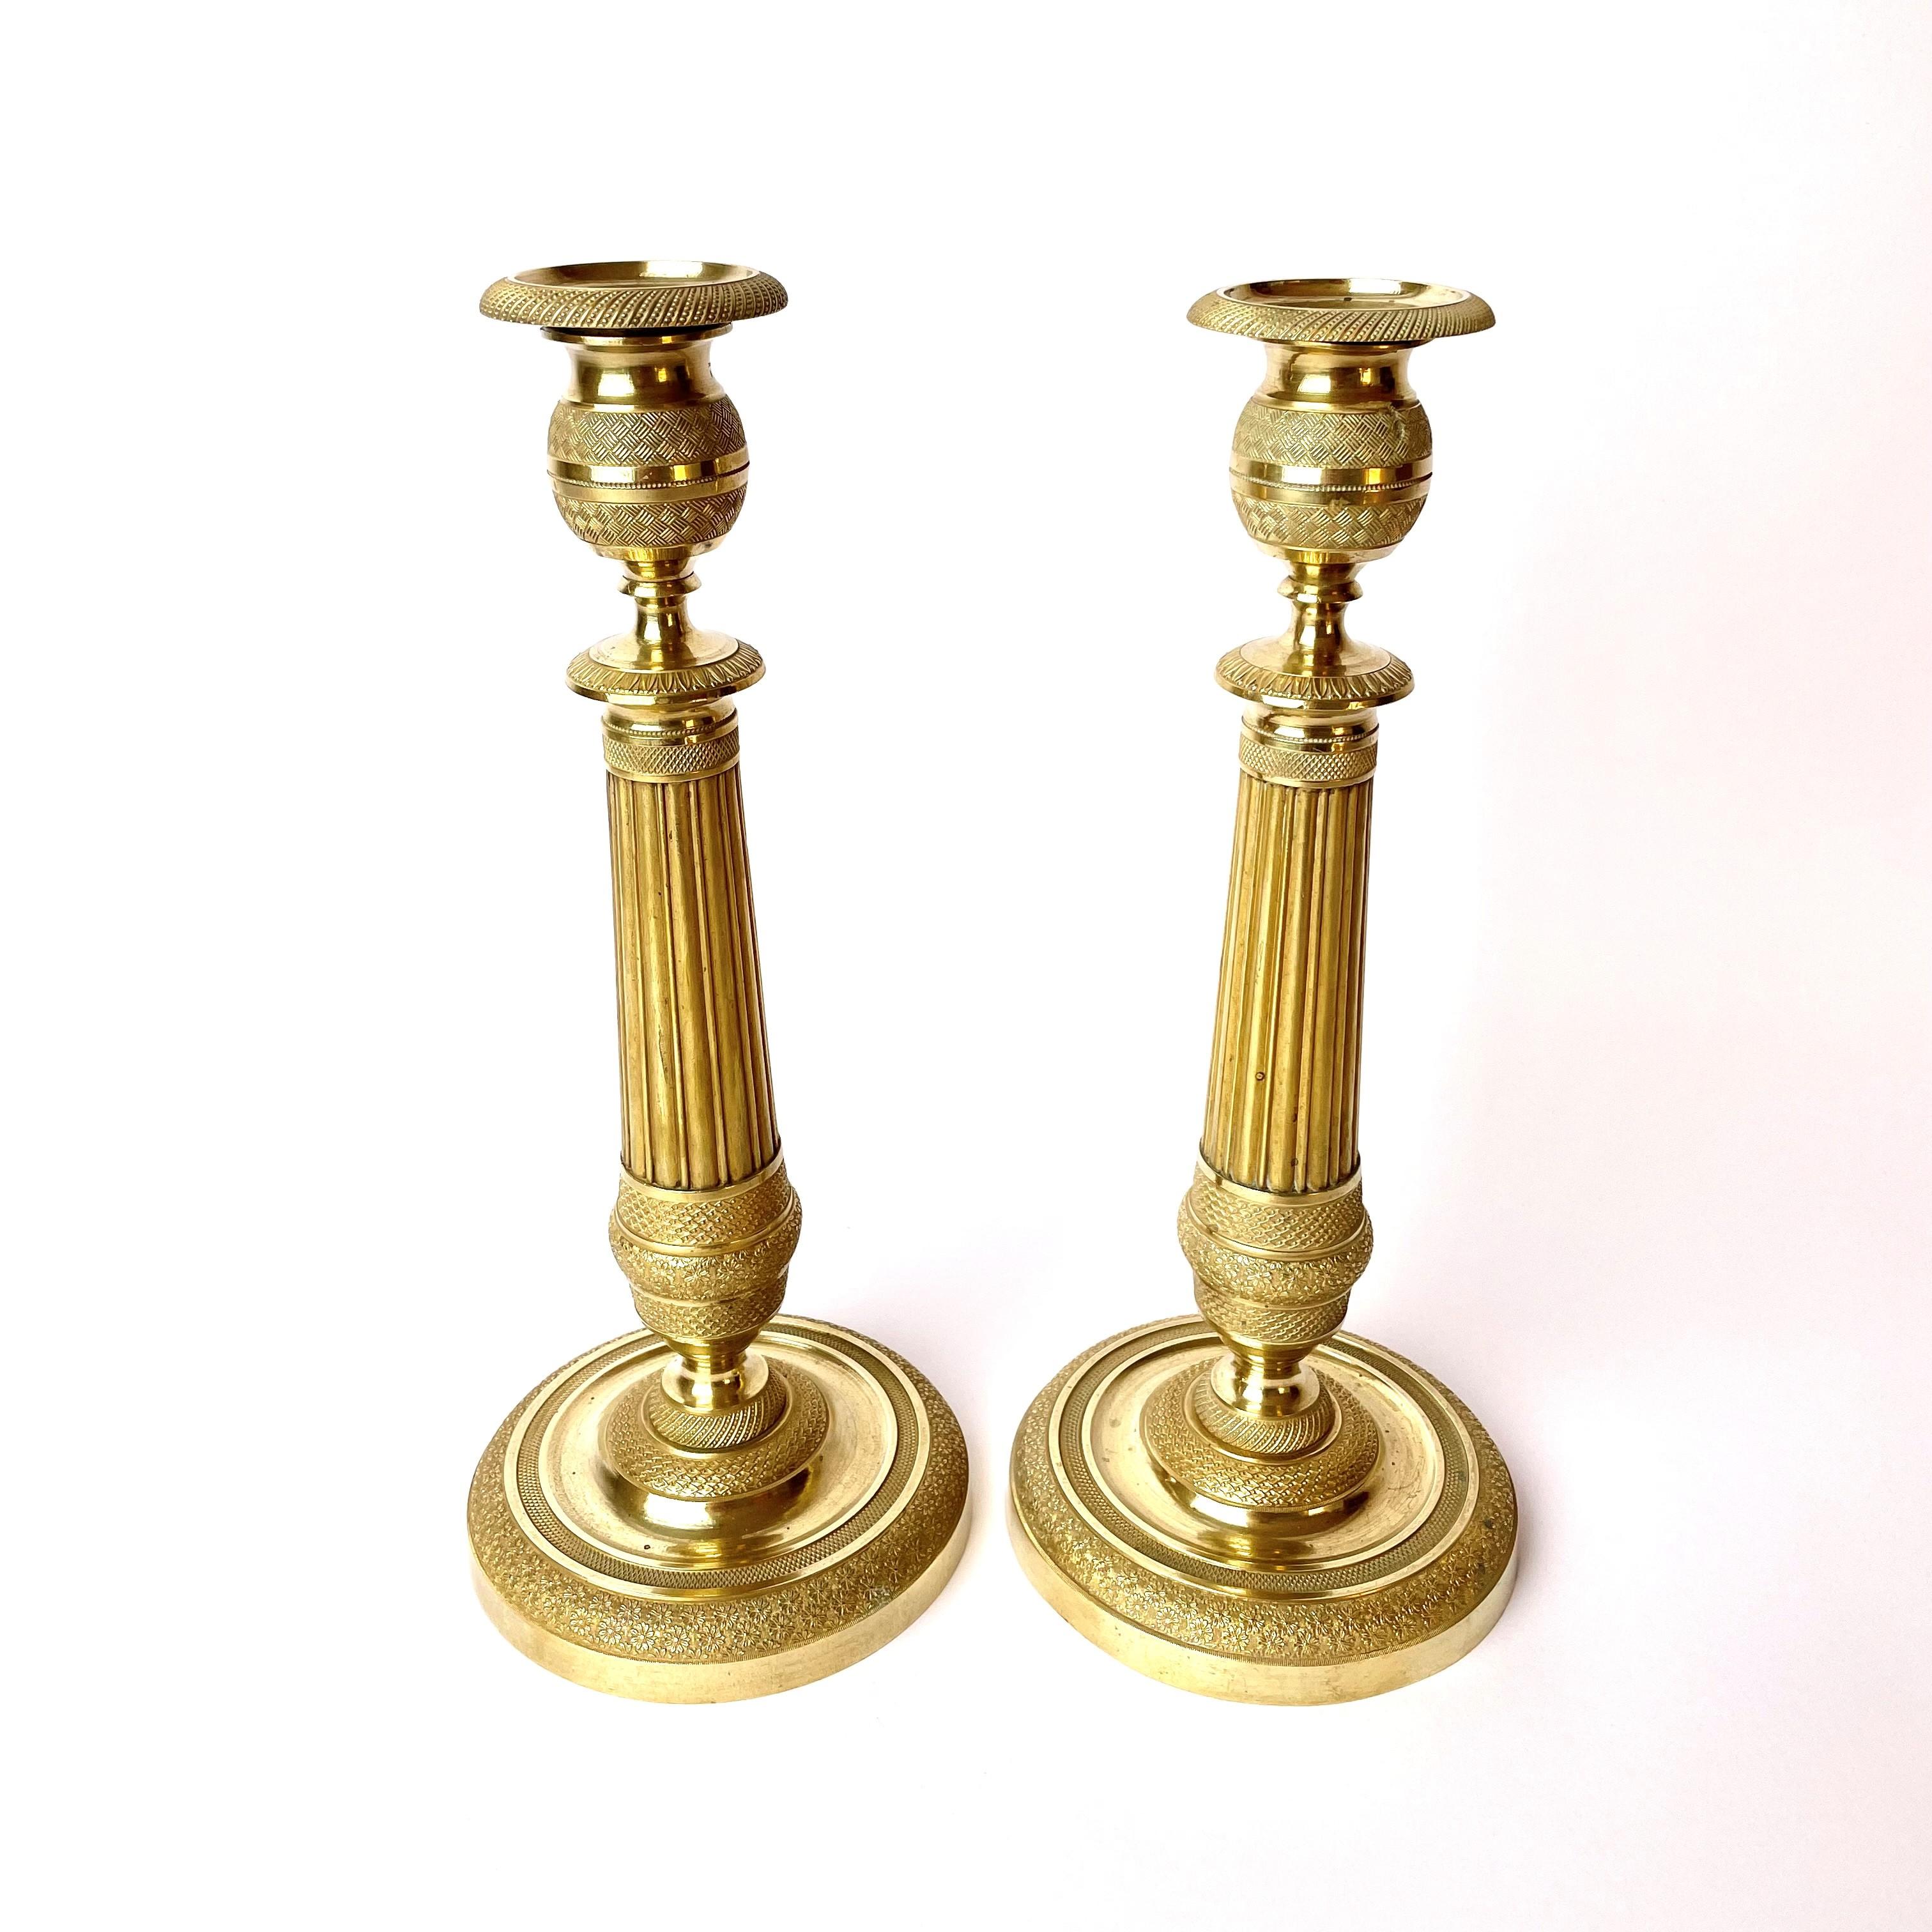 Wonderful pair of Empire gilt bronze candlesticks from the early 19th century, made in France. Very nice original finish with light ware consistent with age and use.